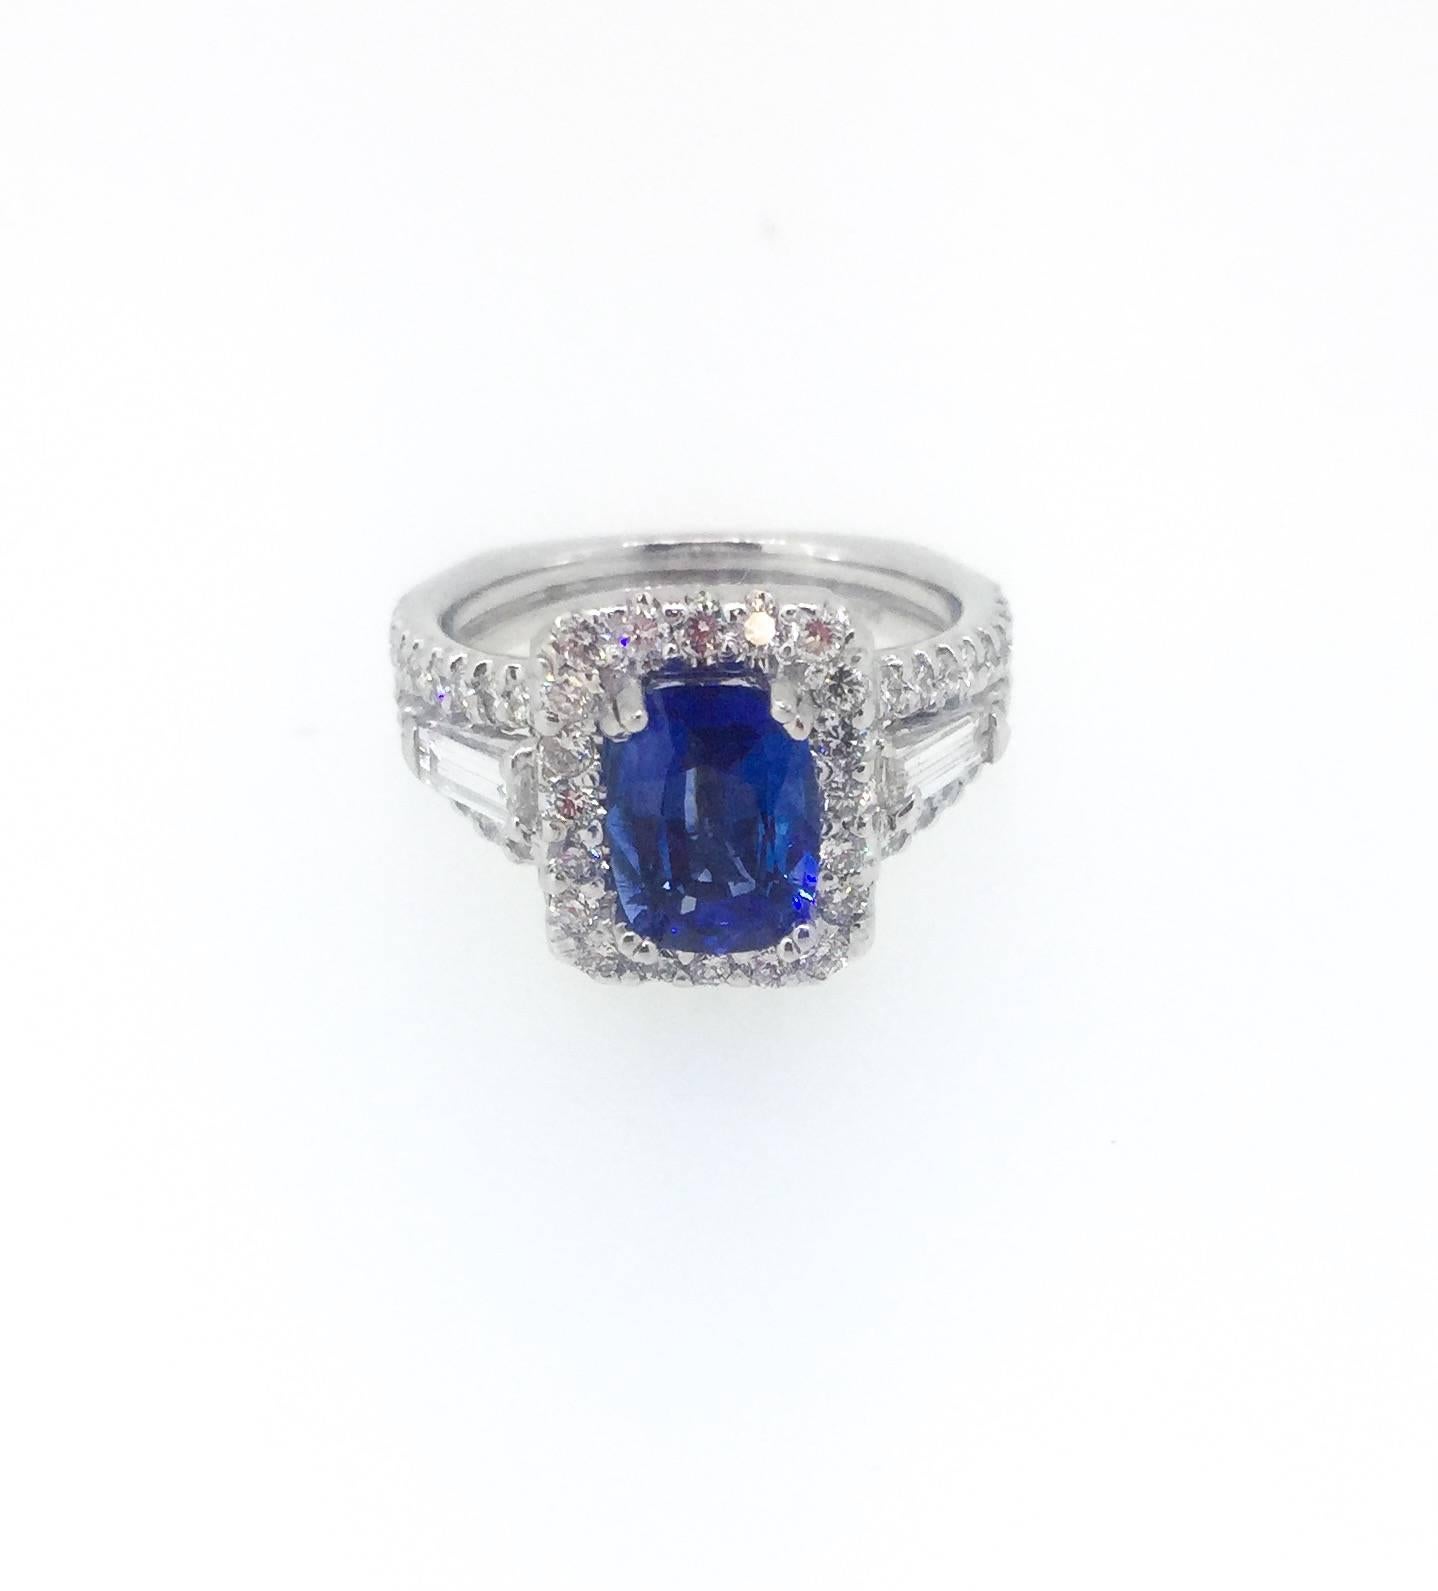 This 14K White Gold Ring has a Blue Sapphire in the center weighing 1.64 carats surrounded by 56 Round Brilliant Cut Diamonds that weigh 0.75 carats and 2 Baguette Cut Diamonds that weight 0.20 carats.  This ring is GIA Certified - Cert #